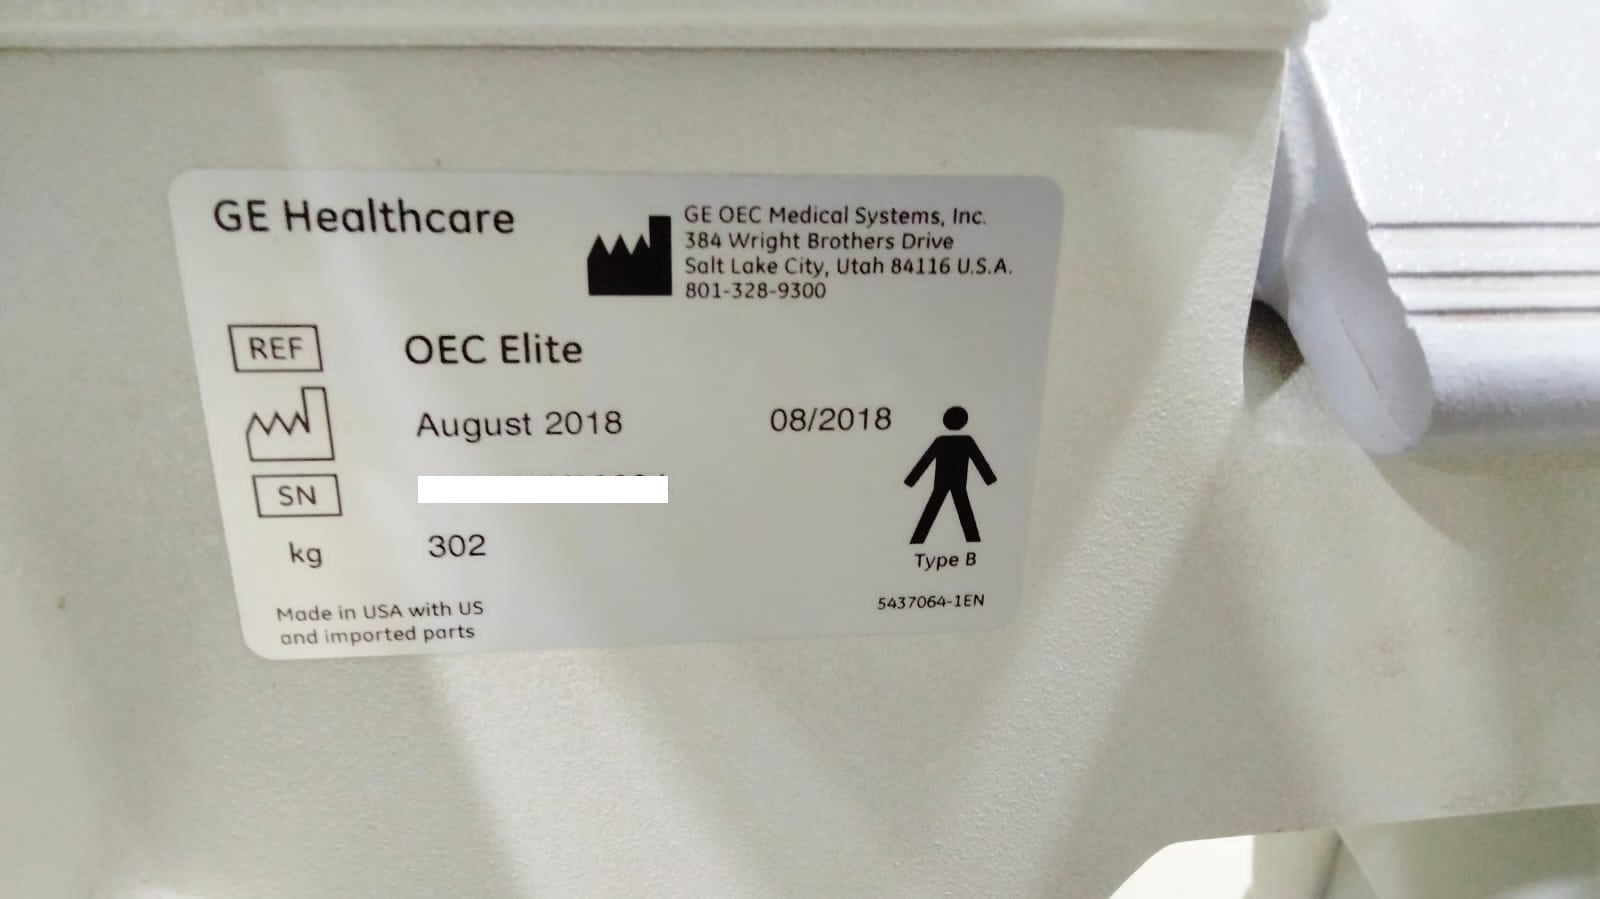 Used GE OEC Elite CFD C ARM OR Mobile Image Intensifier for sale (ID 12183052470) | 20Med